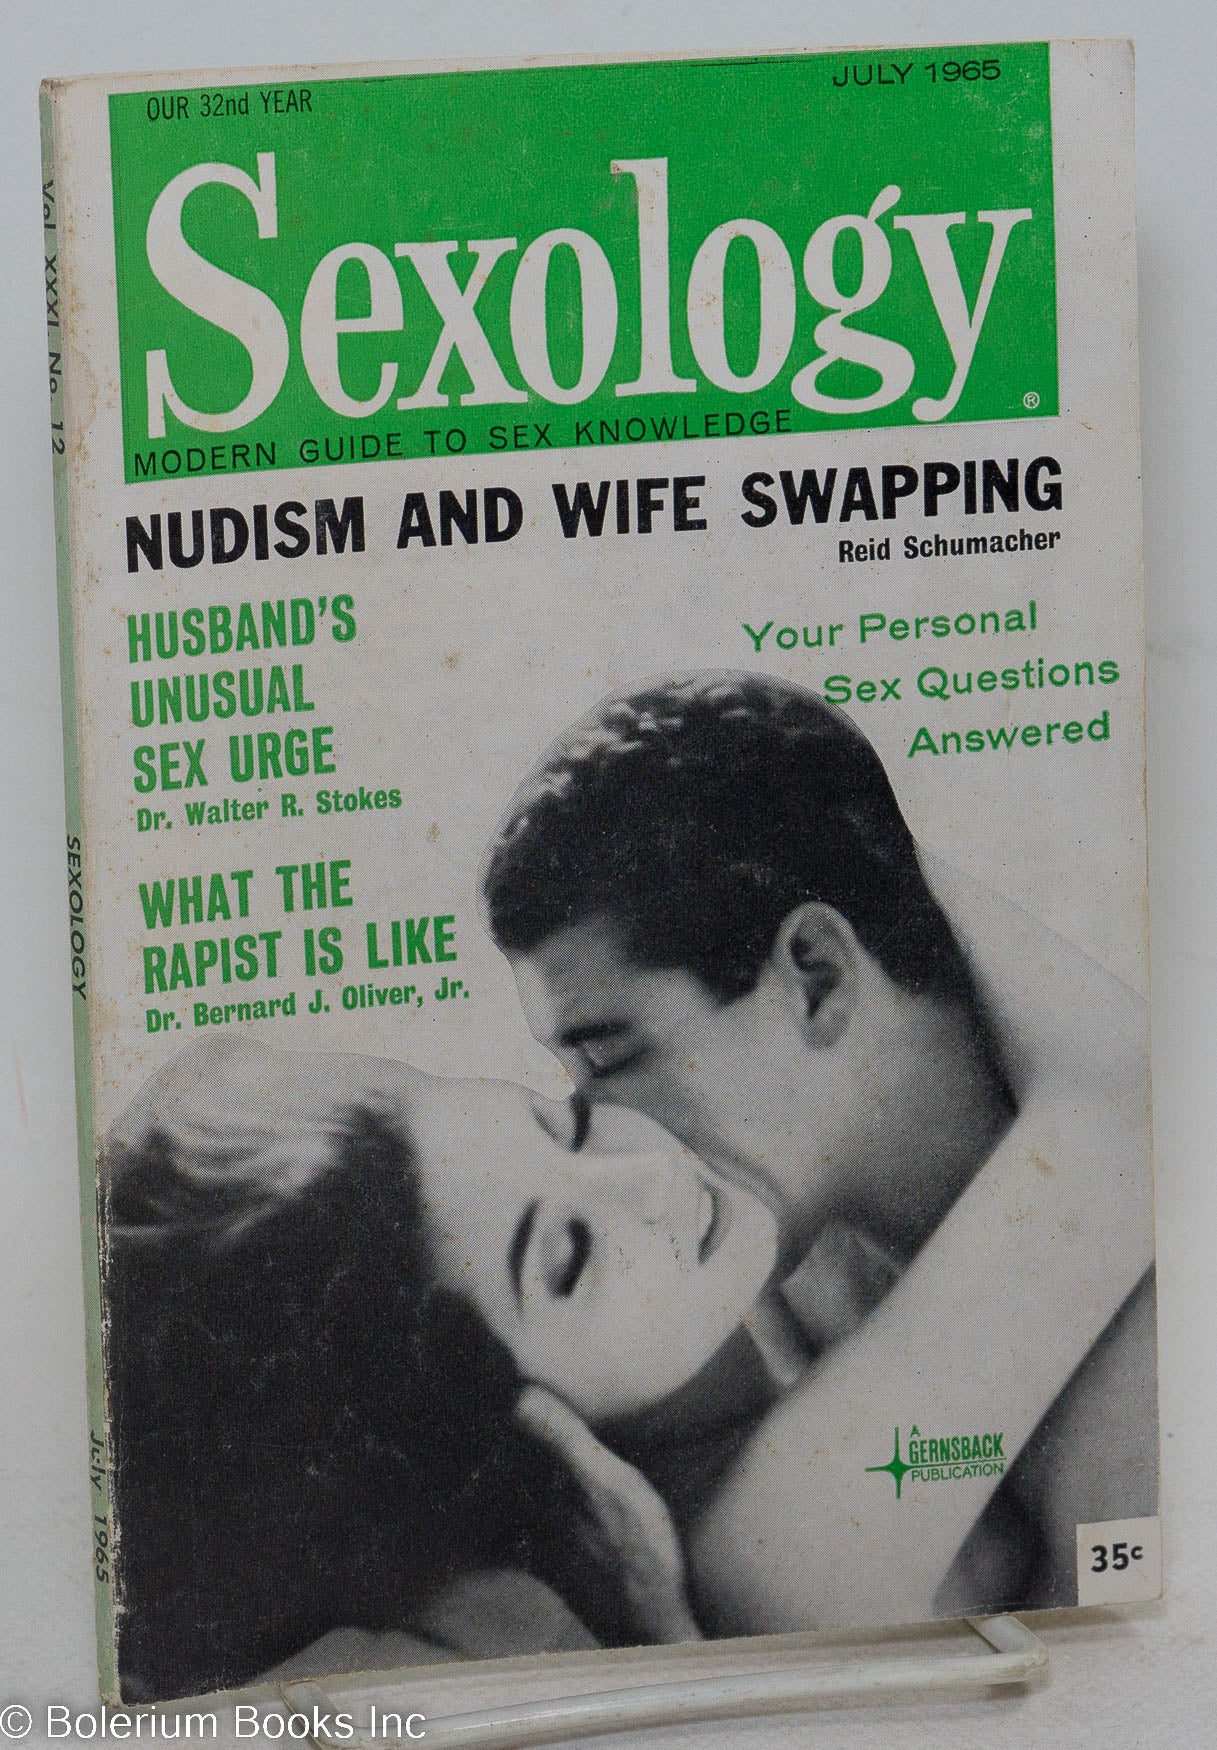 Sexology modern guide to sex knowledge; picture